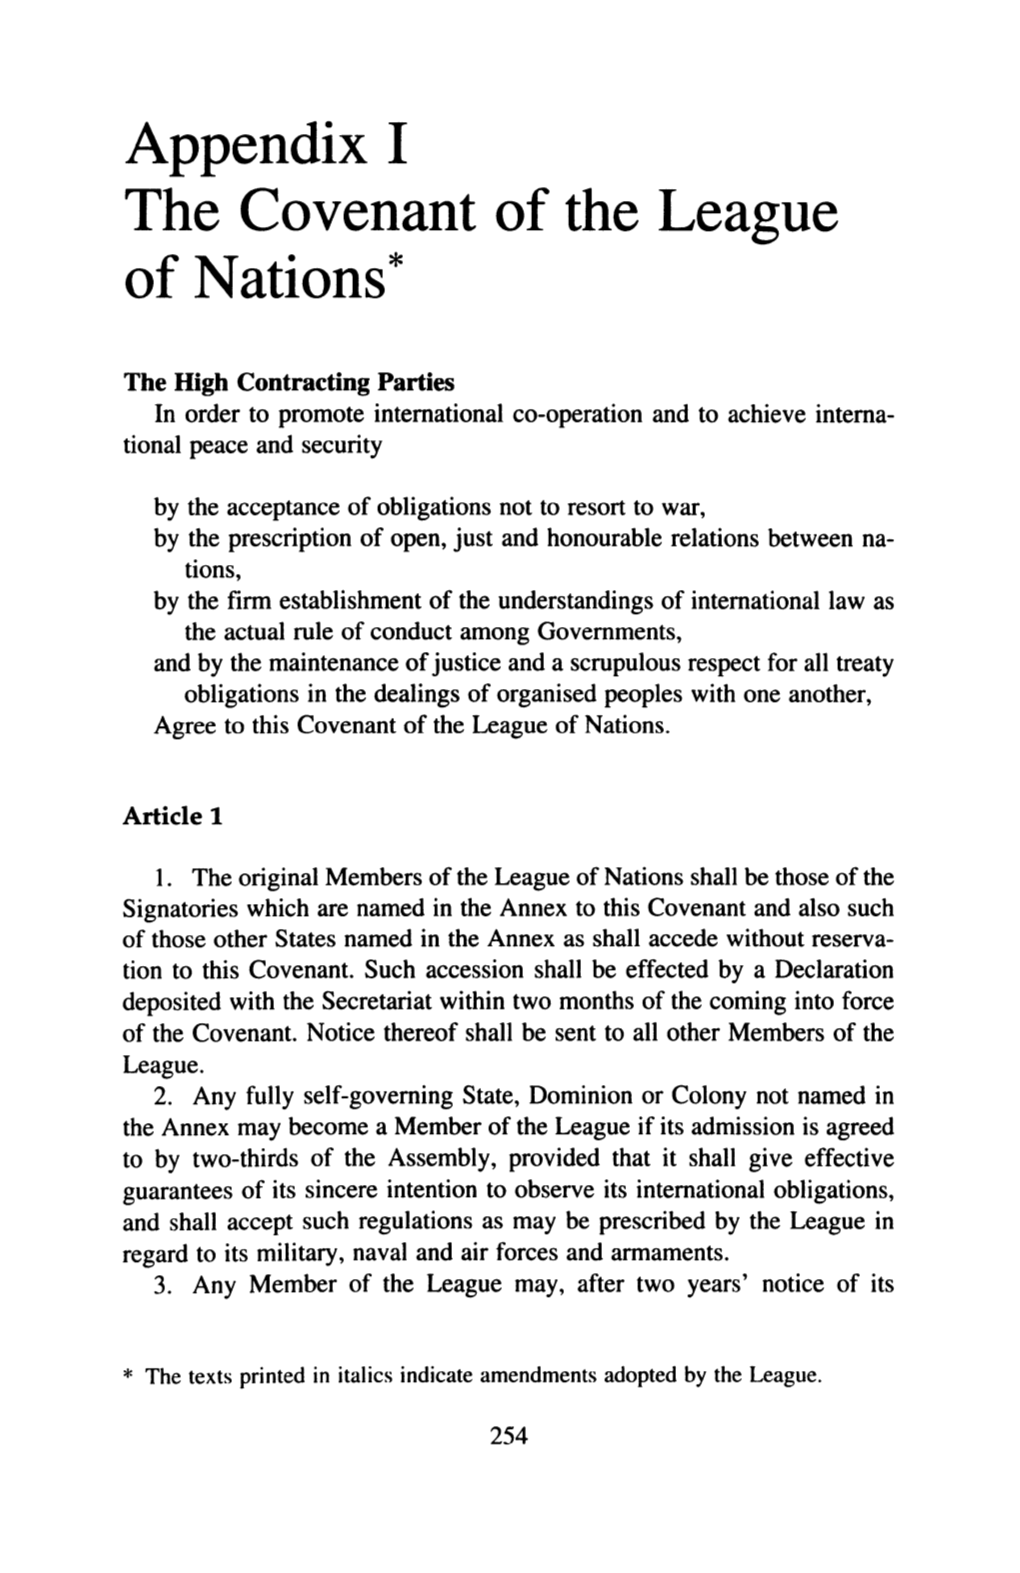 Appendix I the Covenant of the League of Nations*